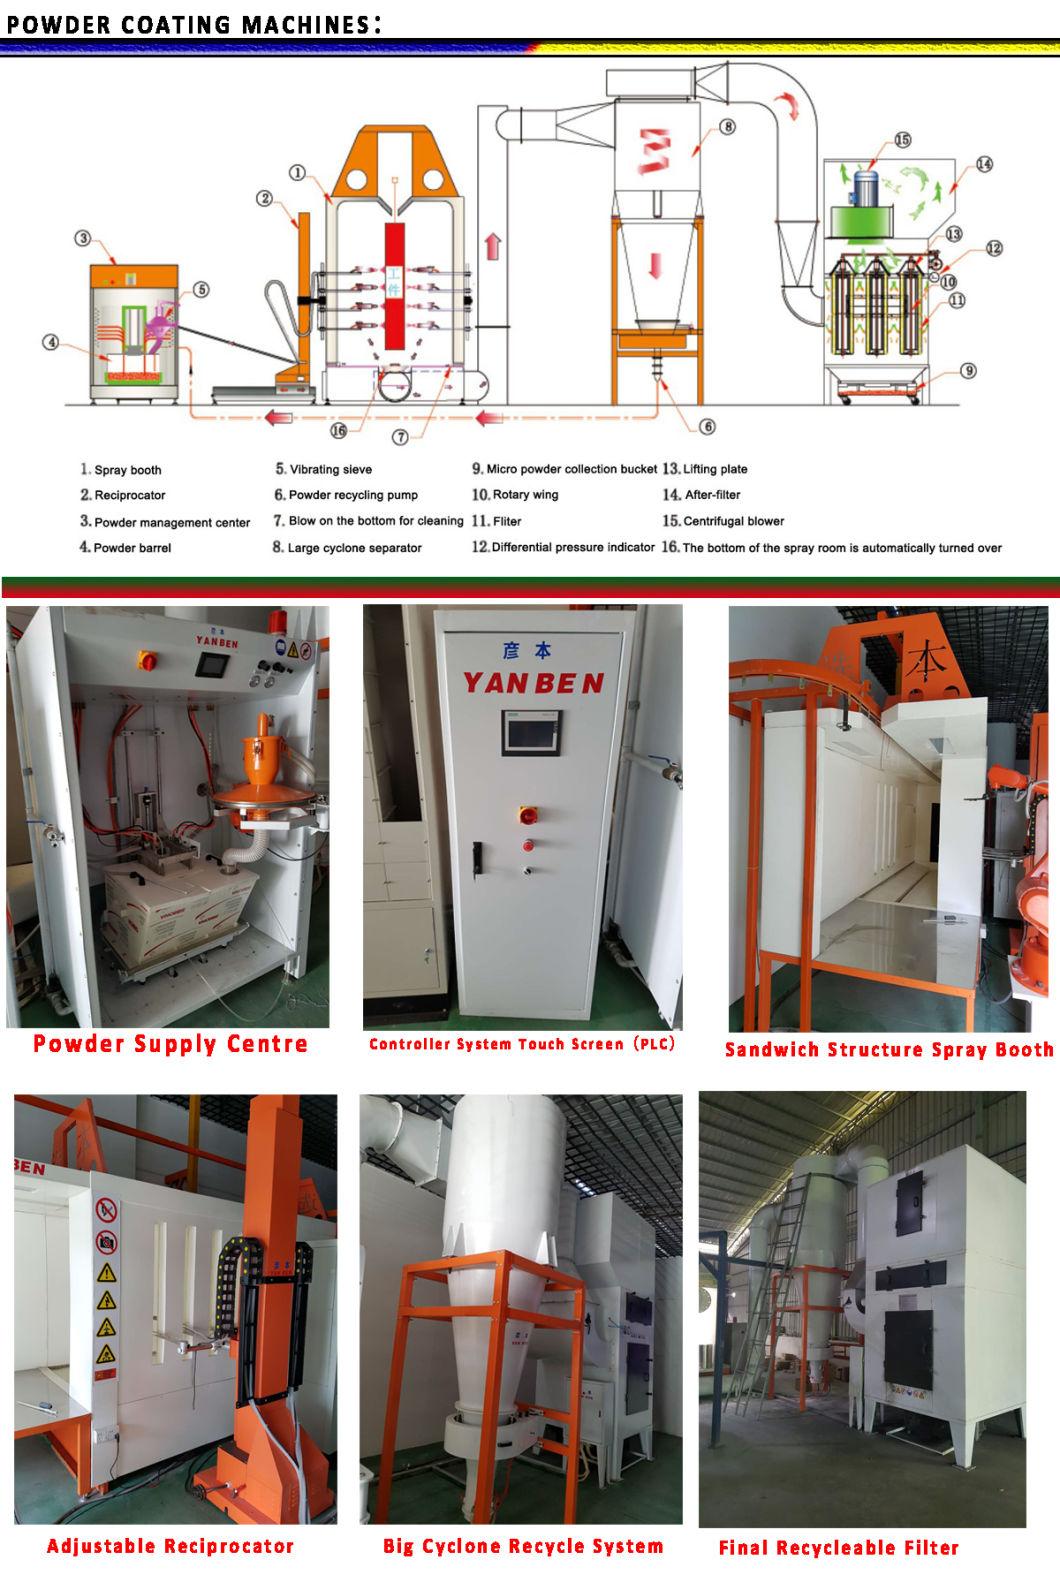 High Efficient Electrostatic Powder Coating Equipment and Automatic Reciprocator